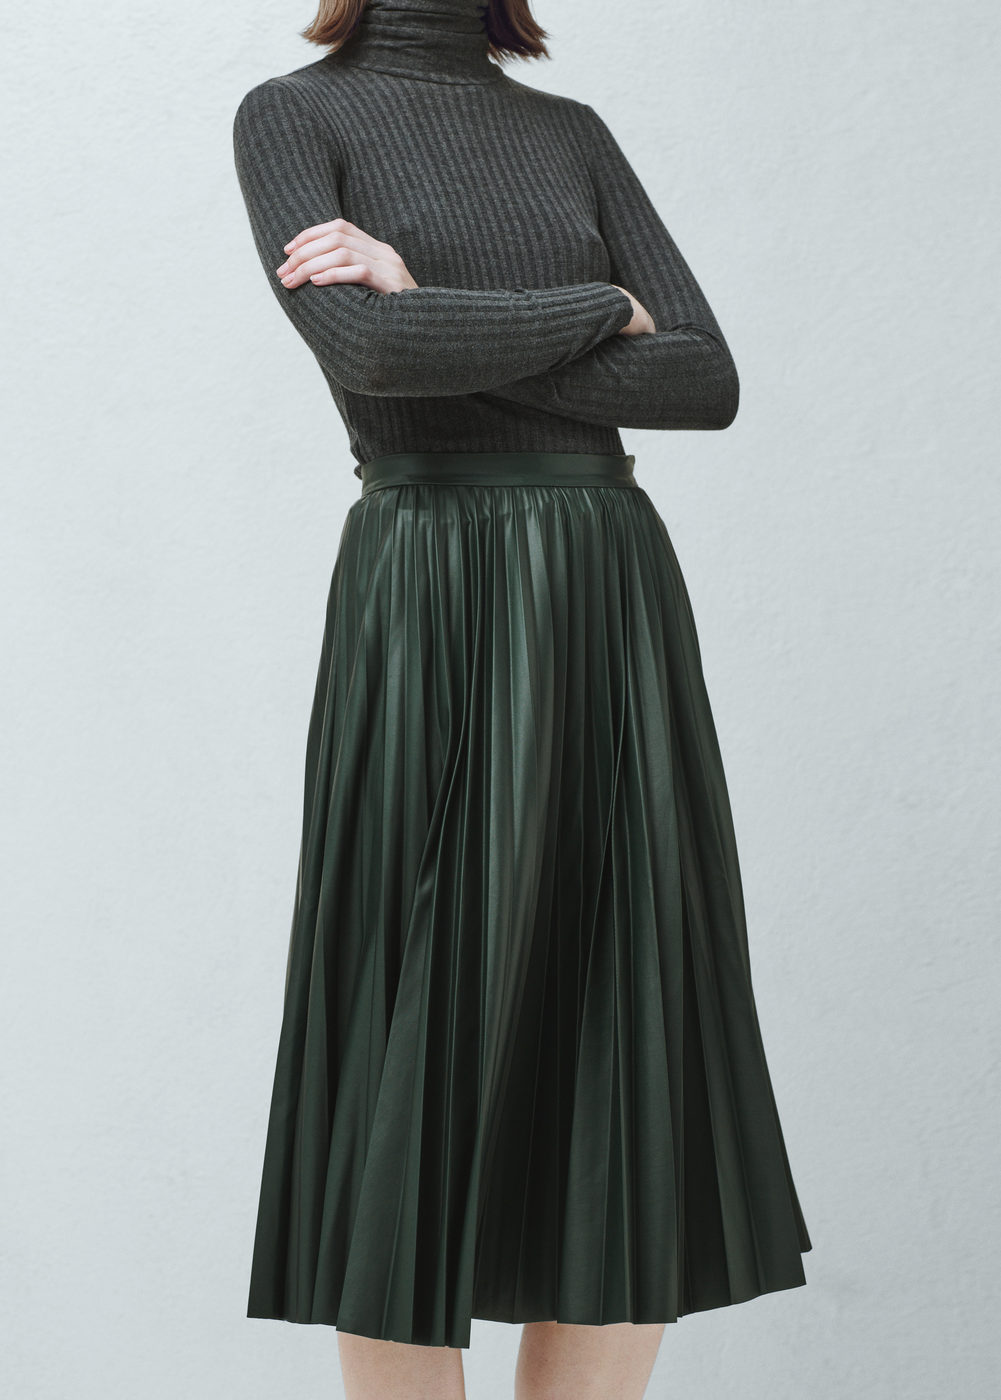 The Fashion Lift: The Pleated Midi Skirt - The perfect skirt for now..